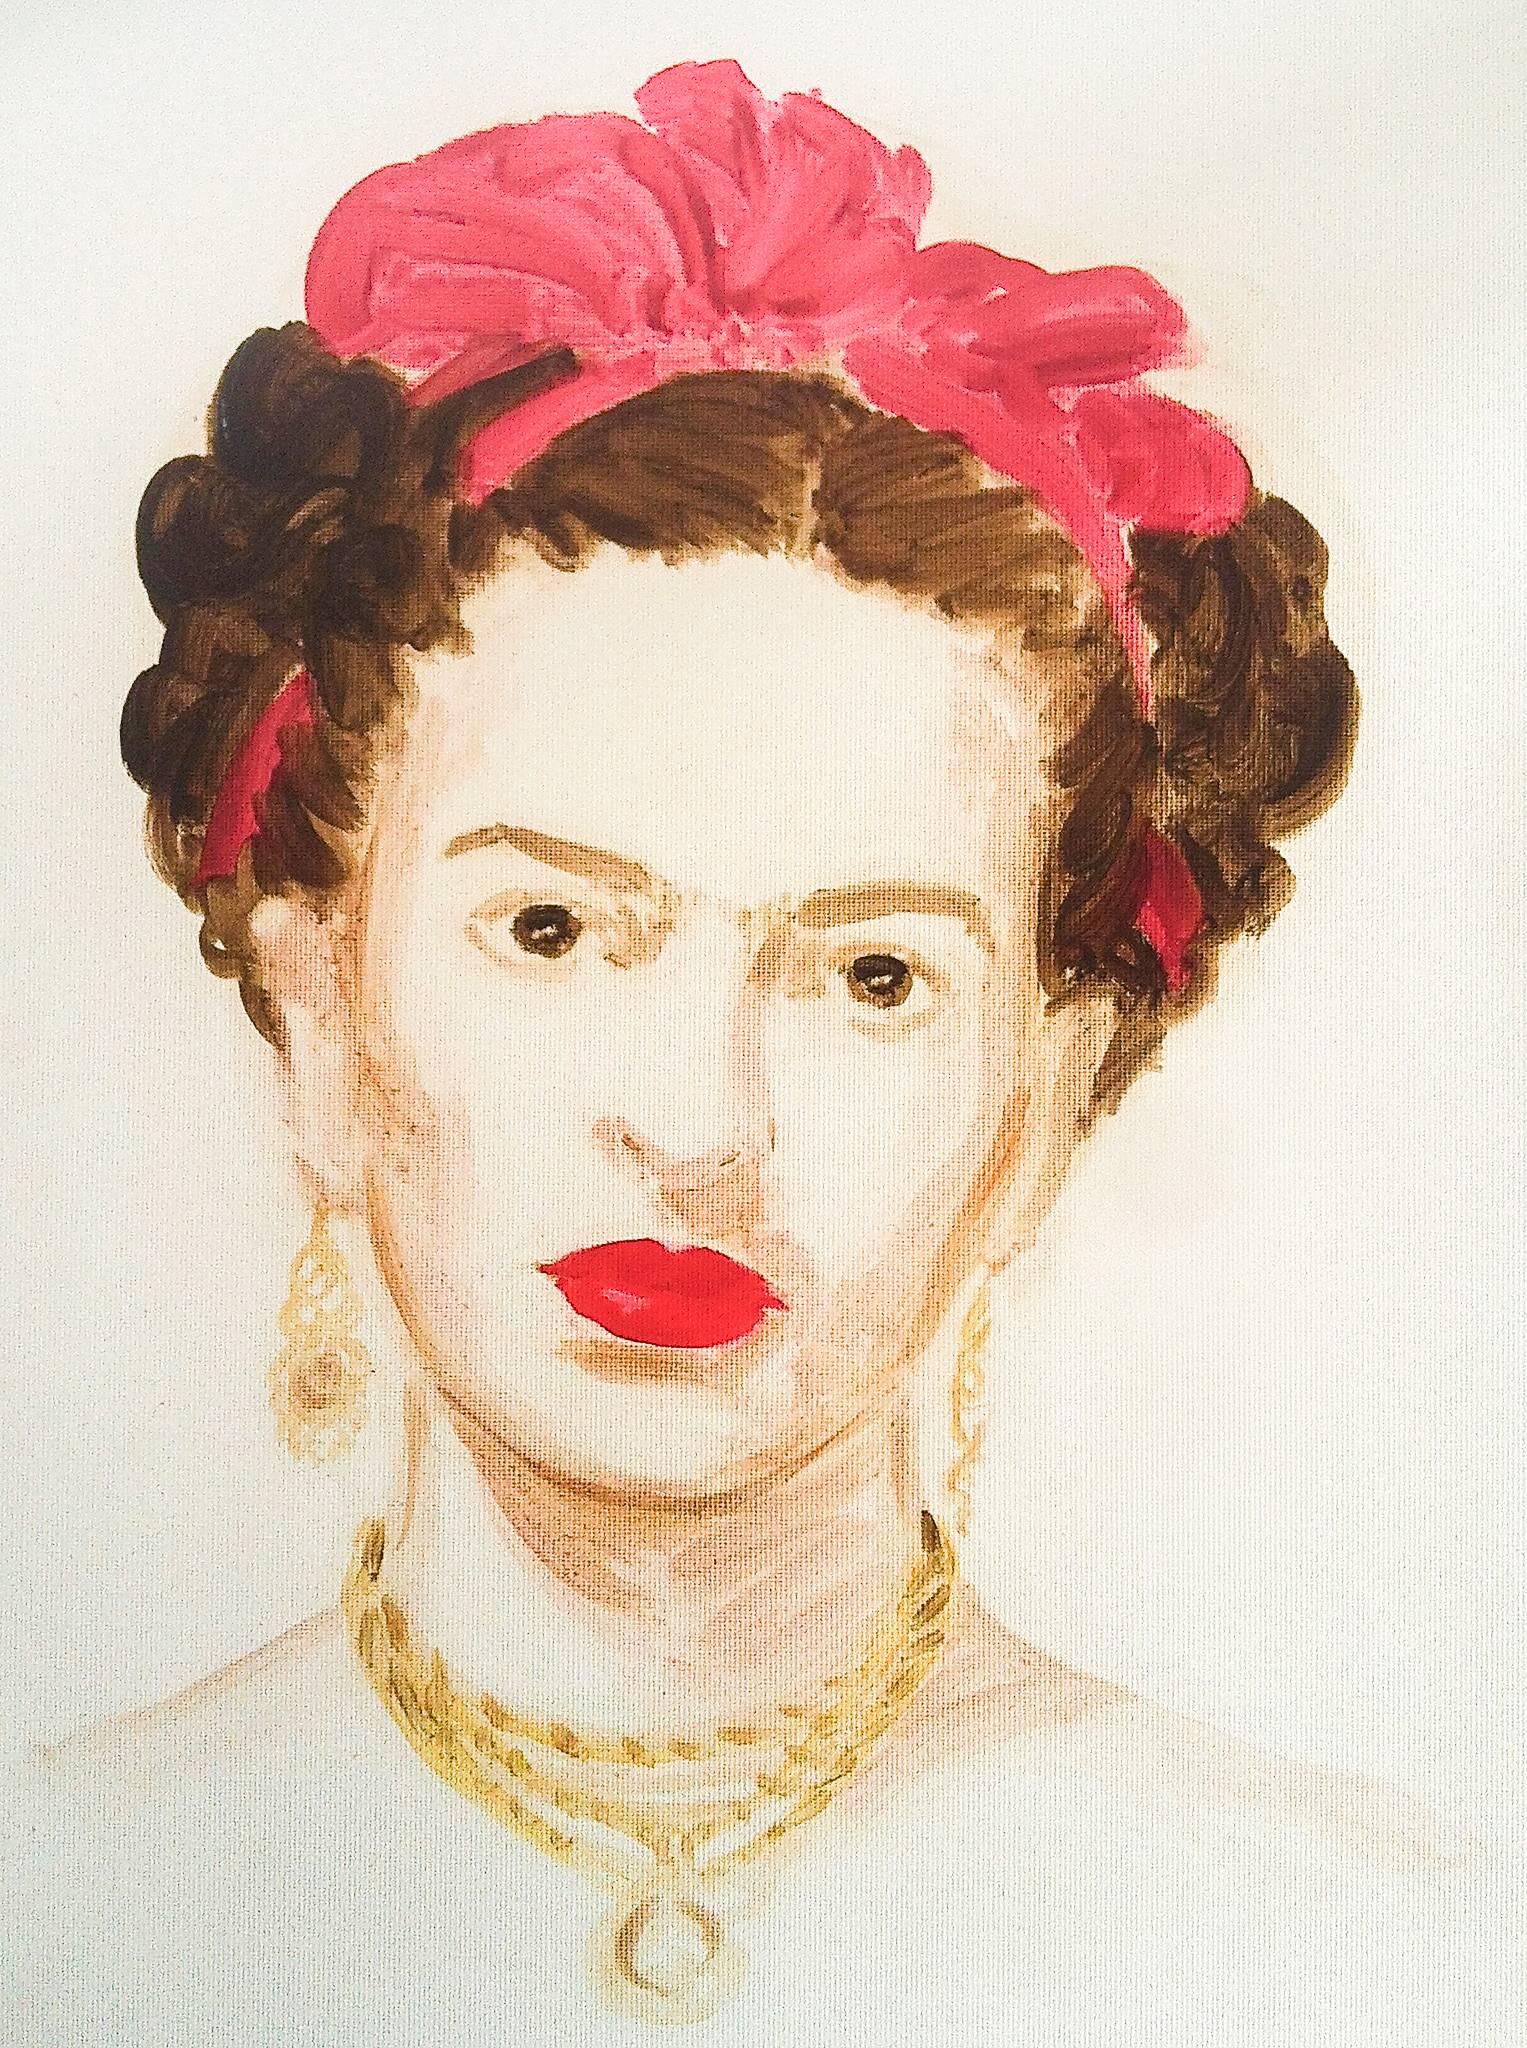 Annie Kevans Portrait Painting - Frida Kahlo from the series "The History of Art"